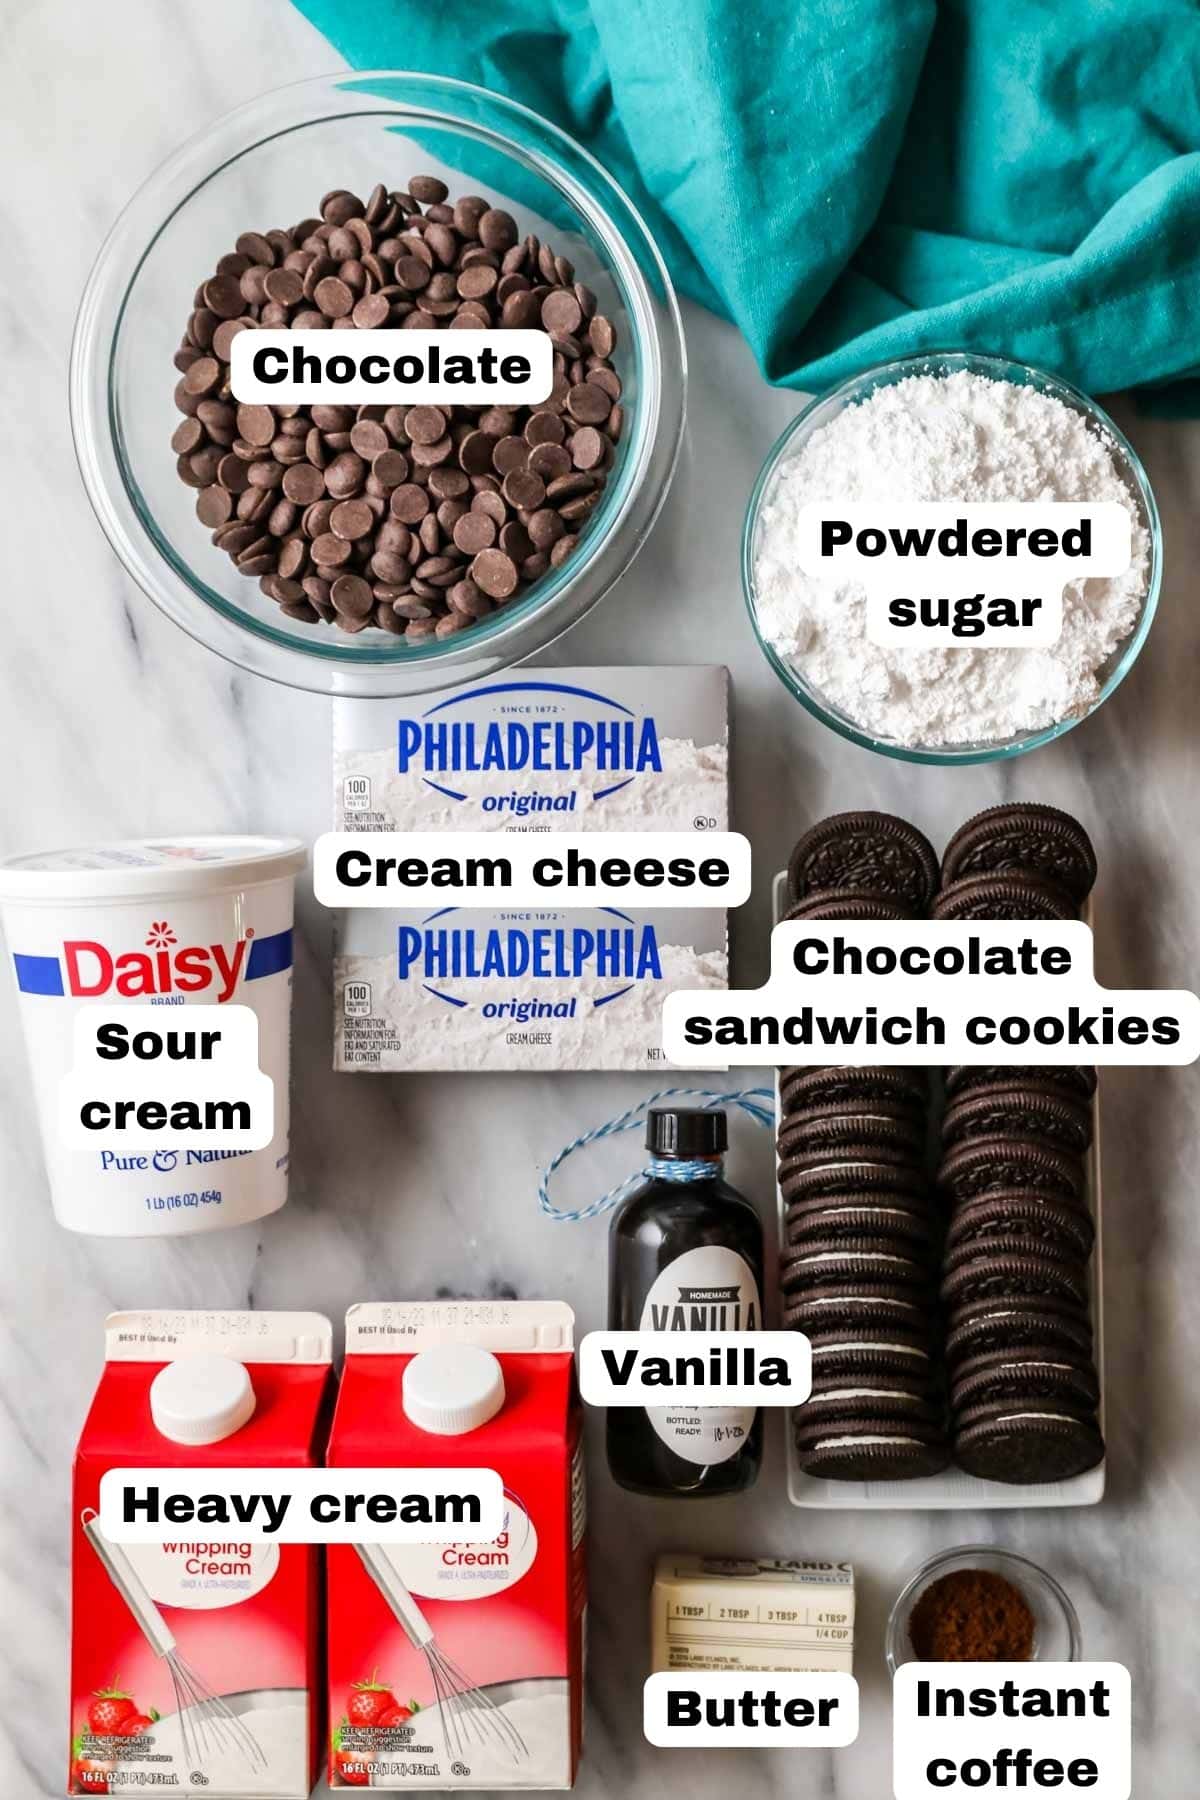 Overhead view of labelled ingredients including heavy cream, cream cheese, chocolate, and more.